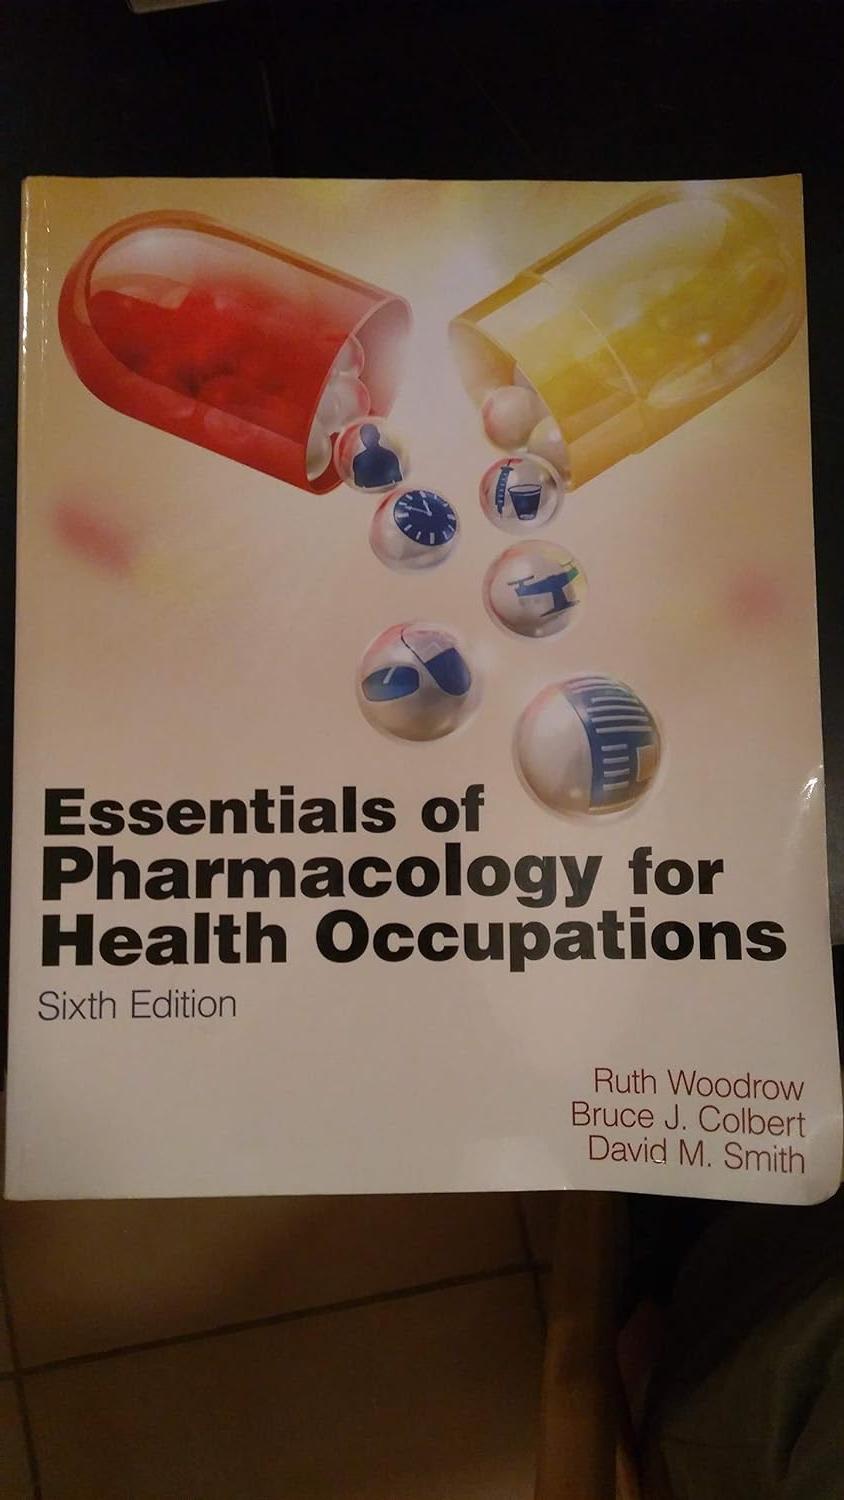 essentials of pharmacology for health occupations 6th edition ruth woodrow, bruce colbert, david m smith